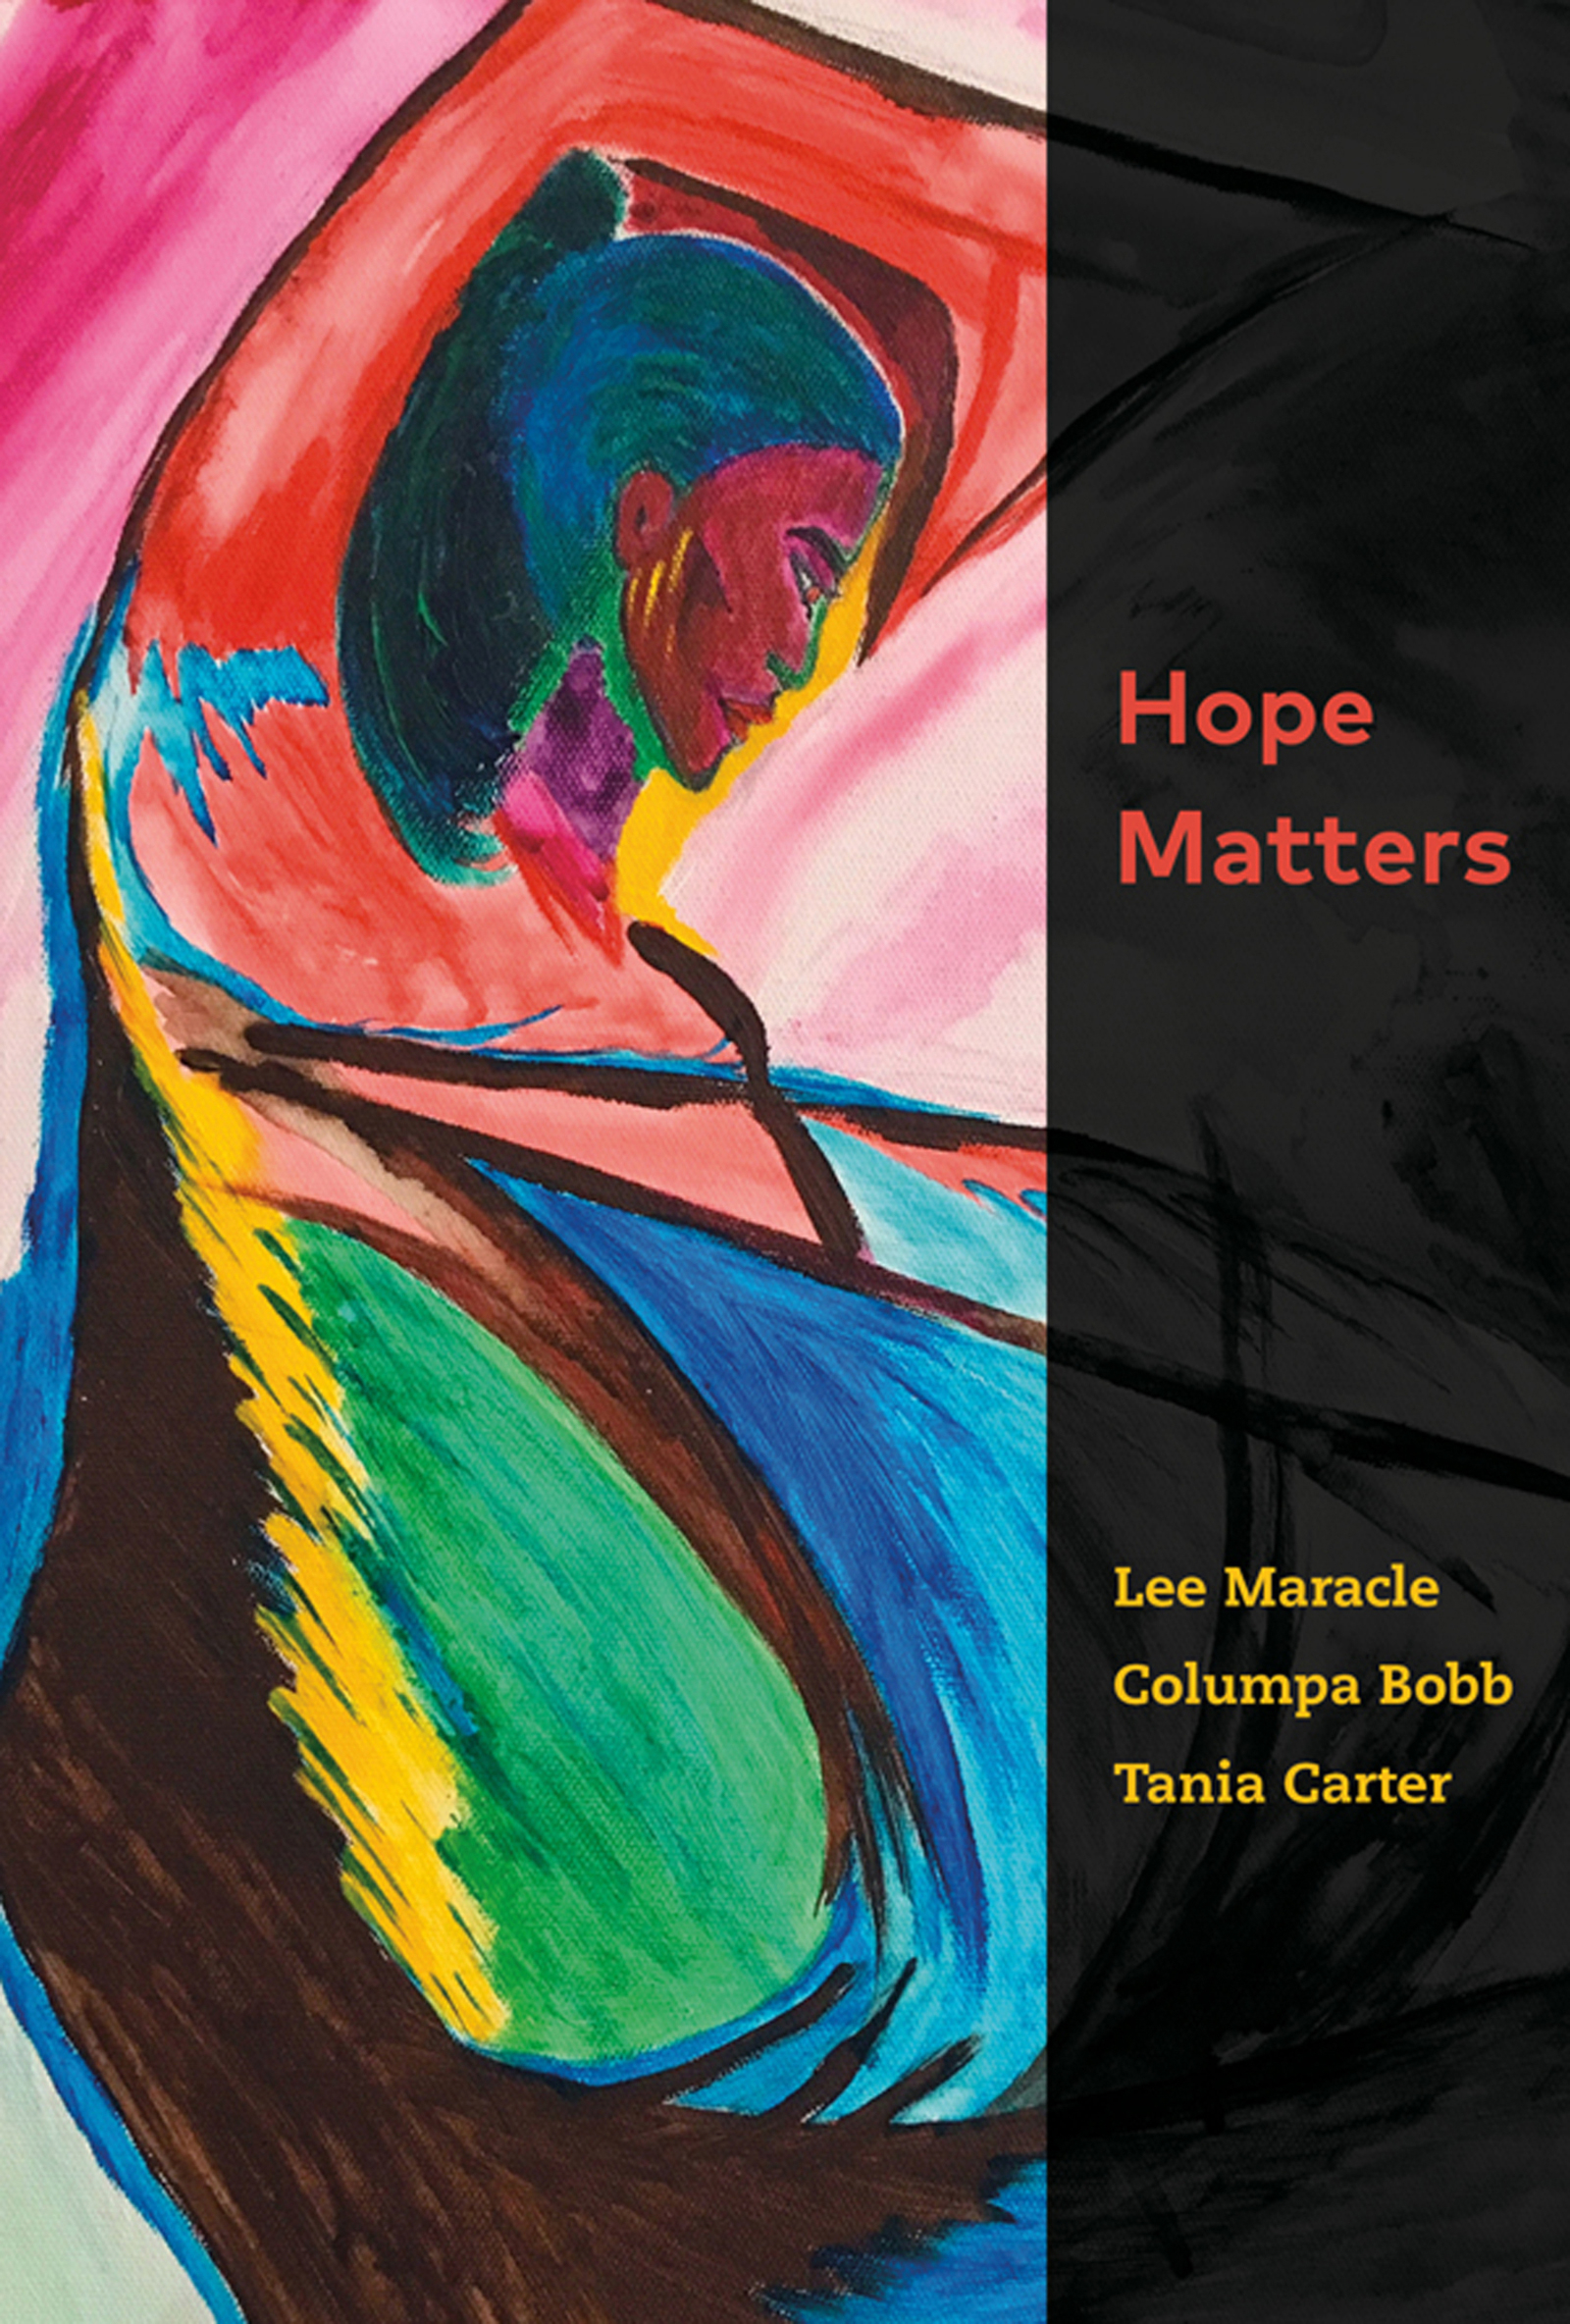 Cover Image of Hope Matters